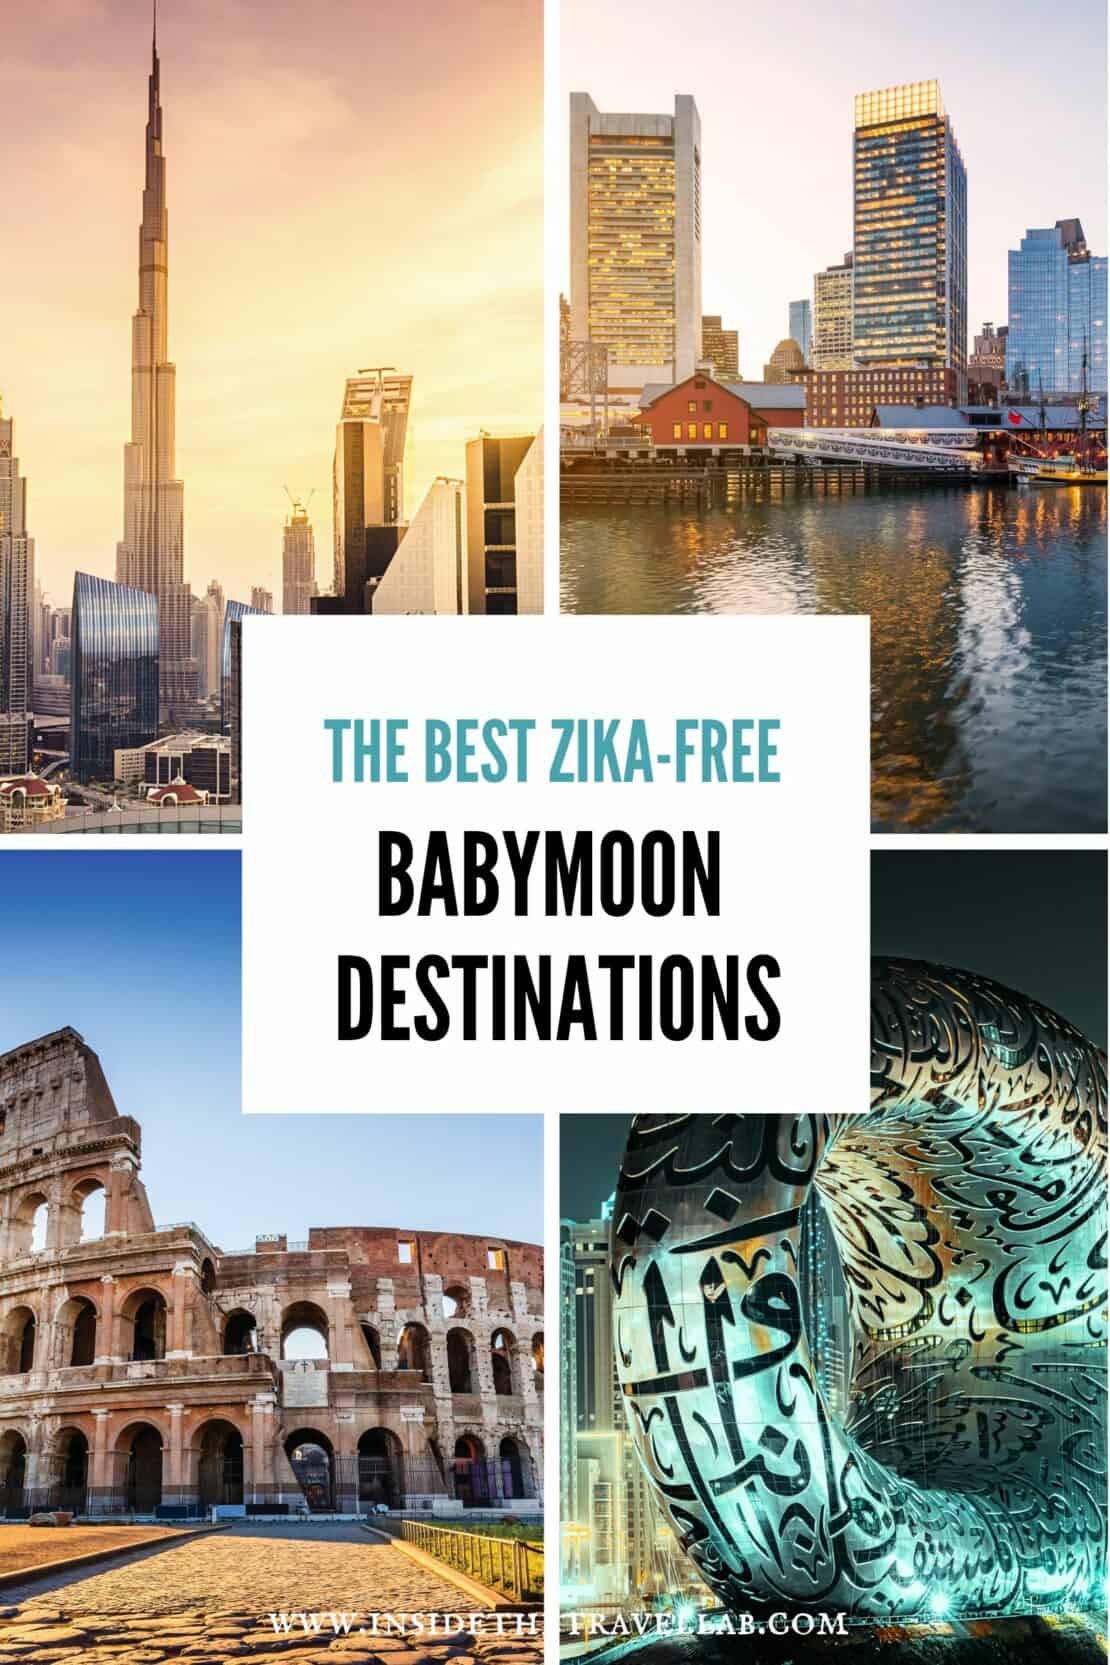 Cover image of a collage of places suitable for zika-free babymoons including Rome, Dubai, Boston and more